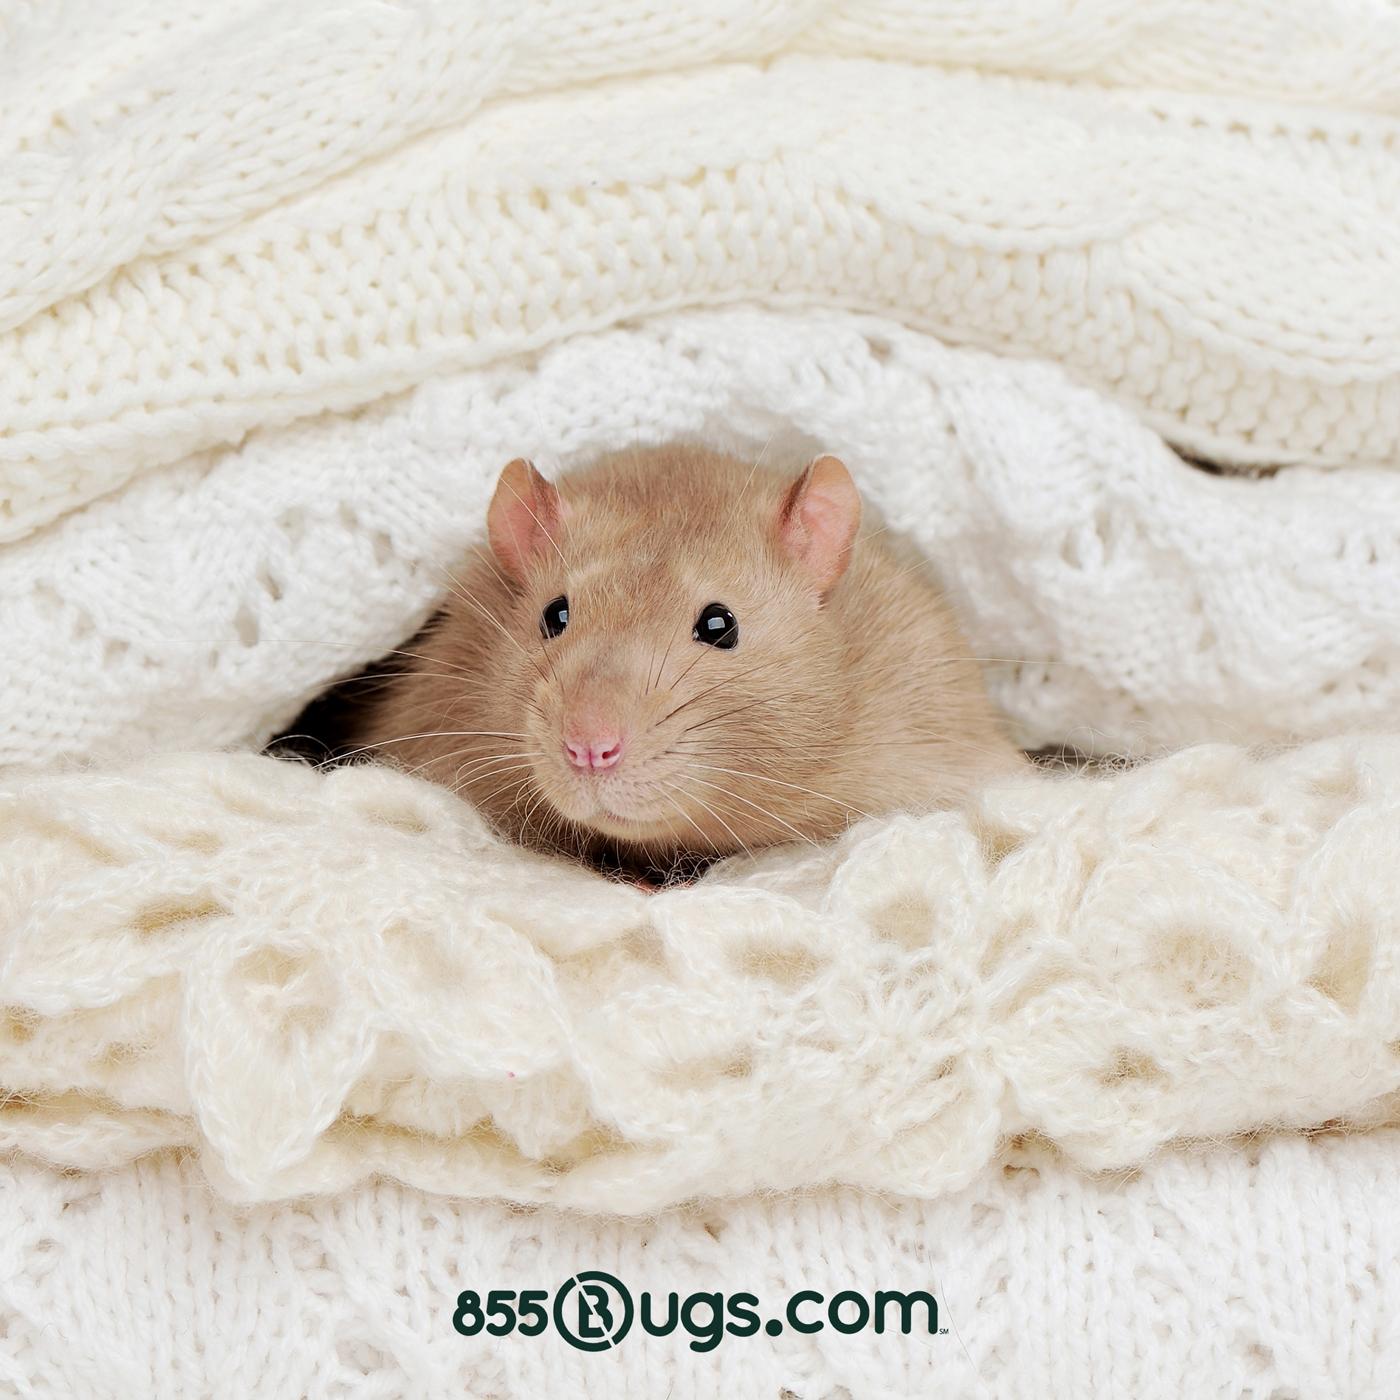 A front facing close up of a beige mouse nestled in a cream colored knitted blanket.